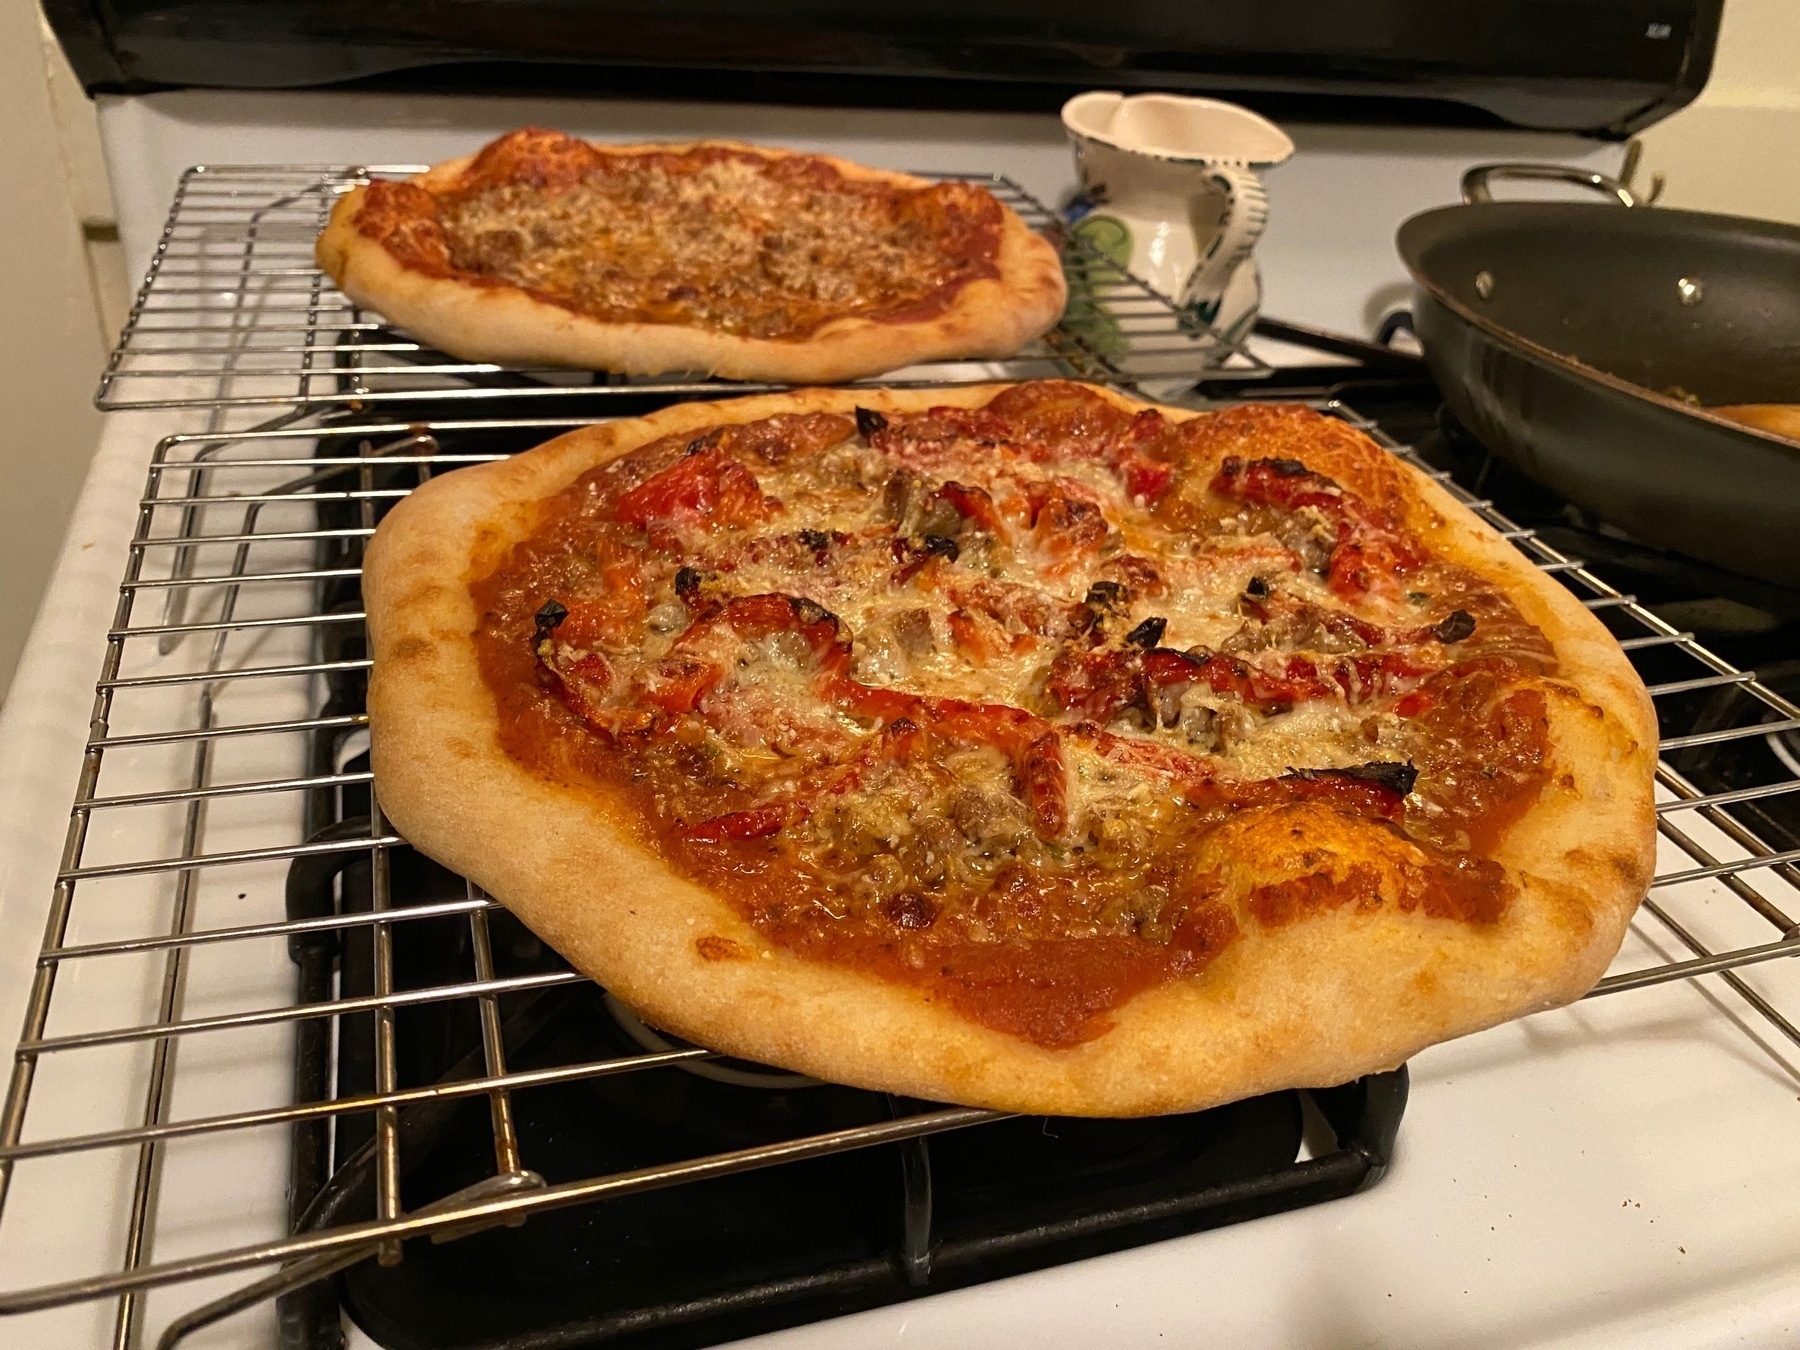 Two small pizzas on cooling racks on a stove.